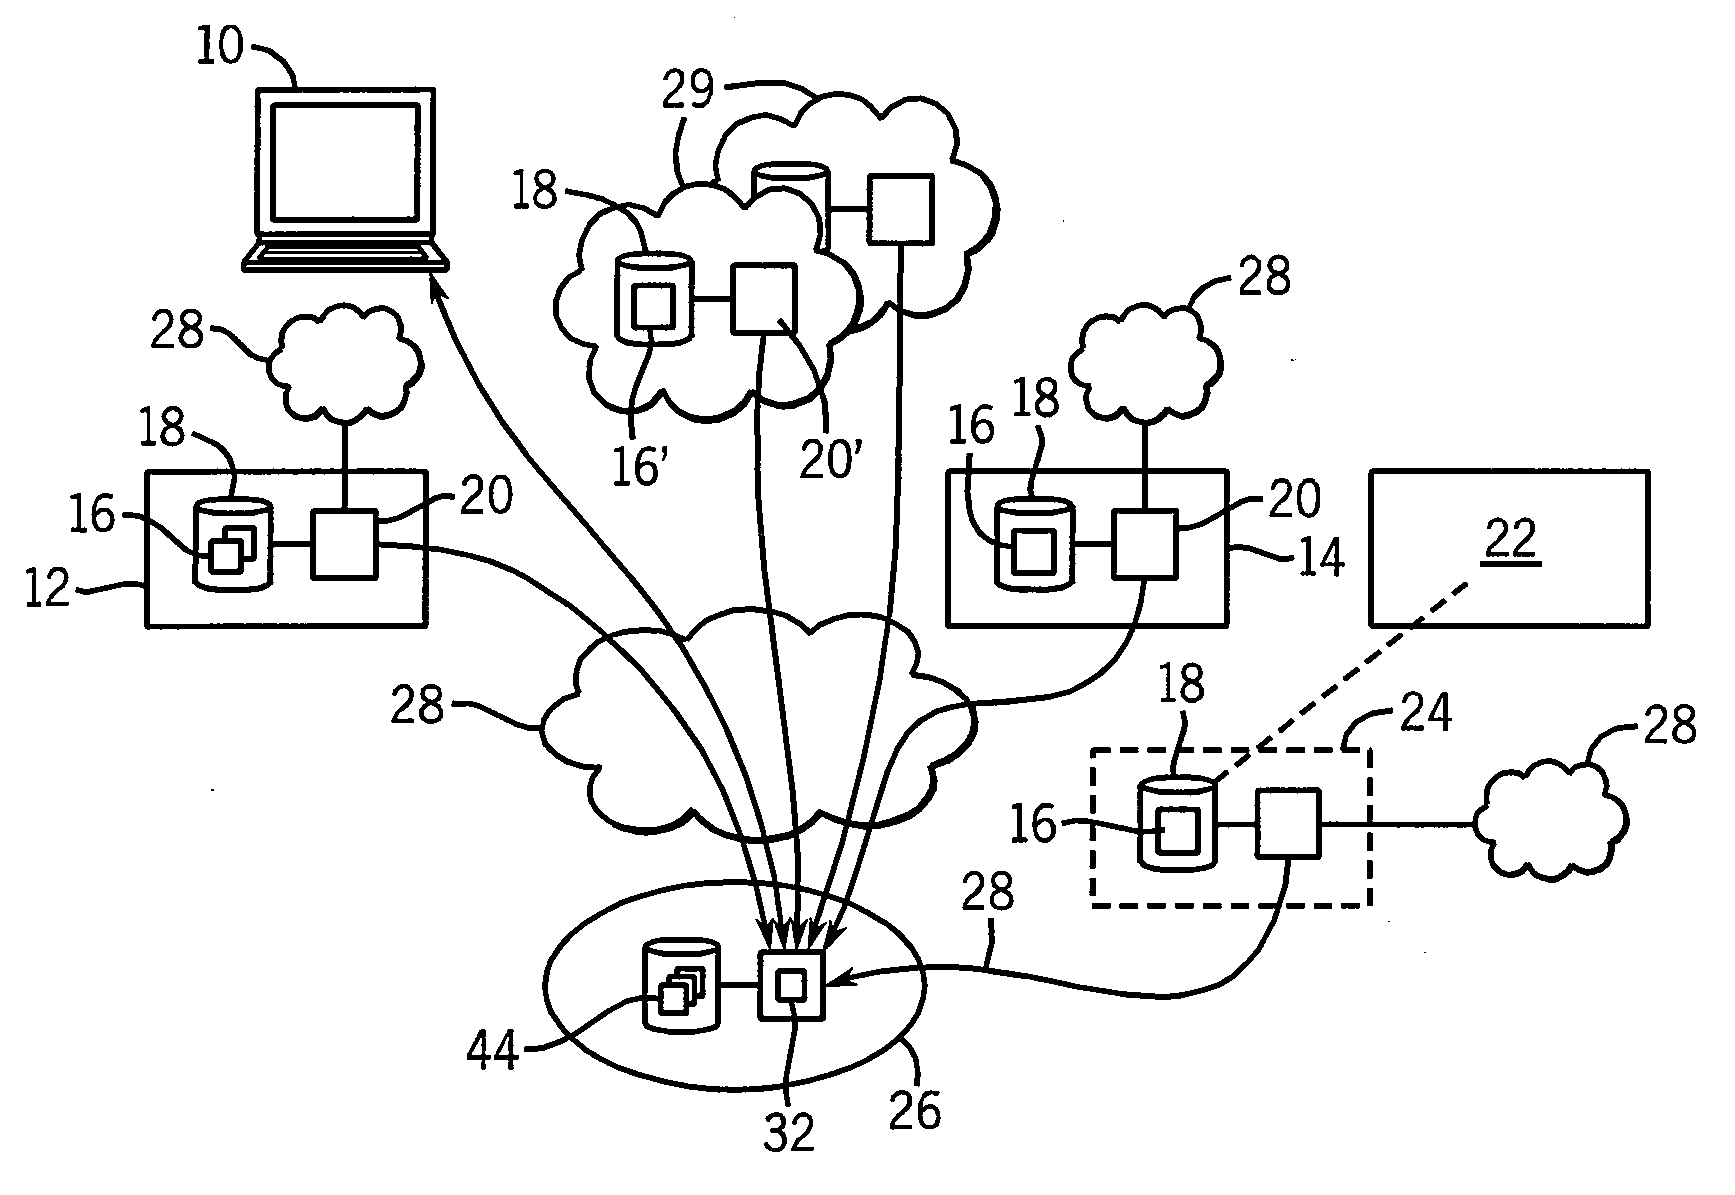 Method and apparatus for accommodating diverse healthcare record centers